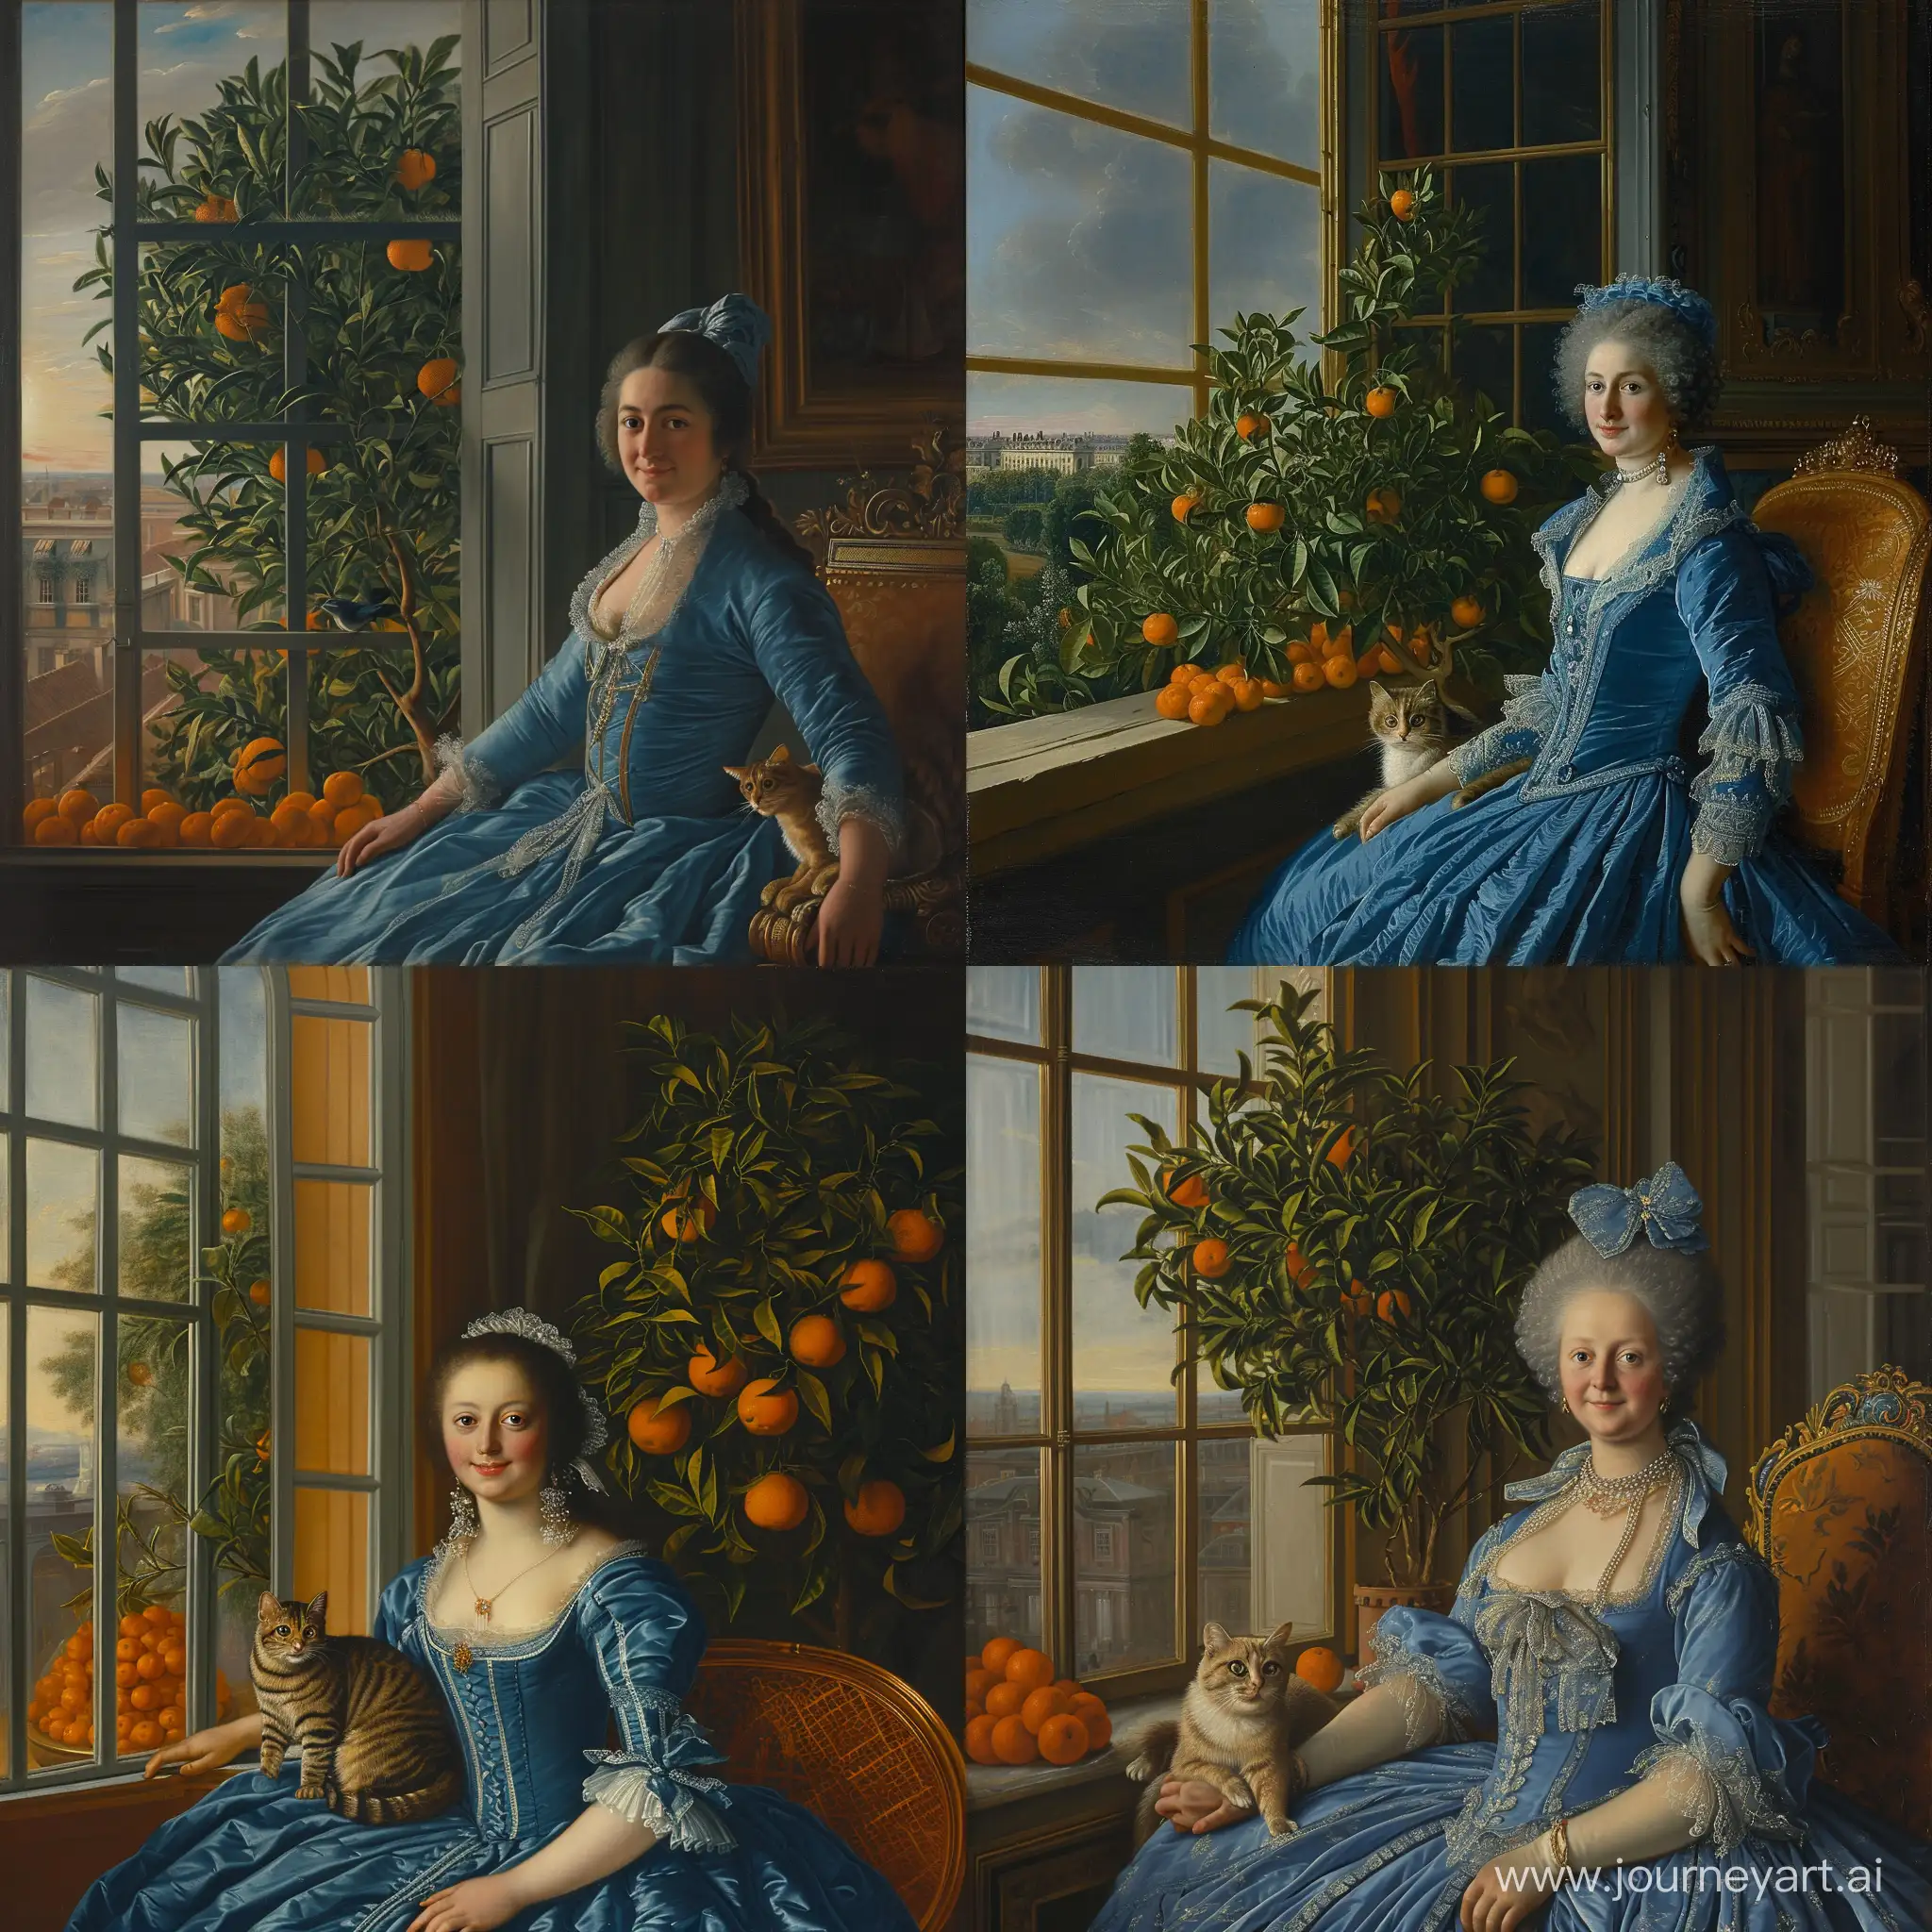 Oil painting portrait by Elisabeth Louise Vigée Le Brun of a spanish lady wearing blue fashionable in 1775 dress sitting near a window with a cat on her lap, high class interior visible in the back, orange tree with oranges visible trough the window